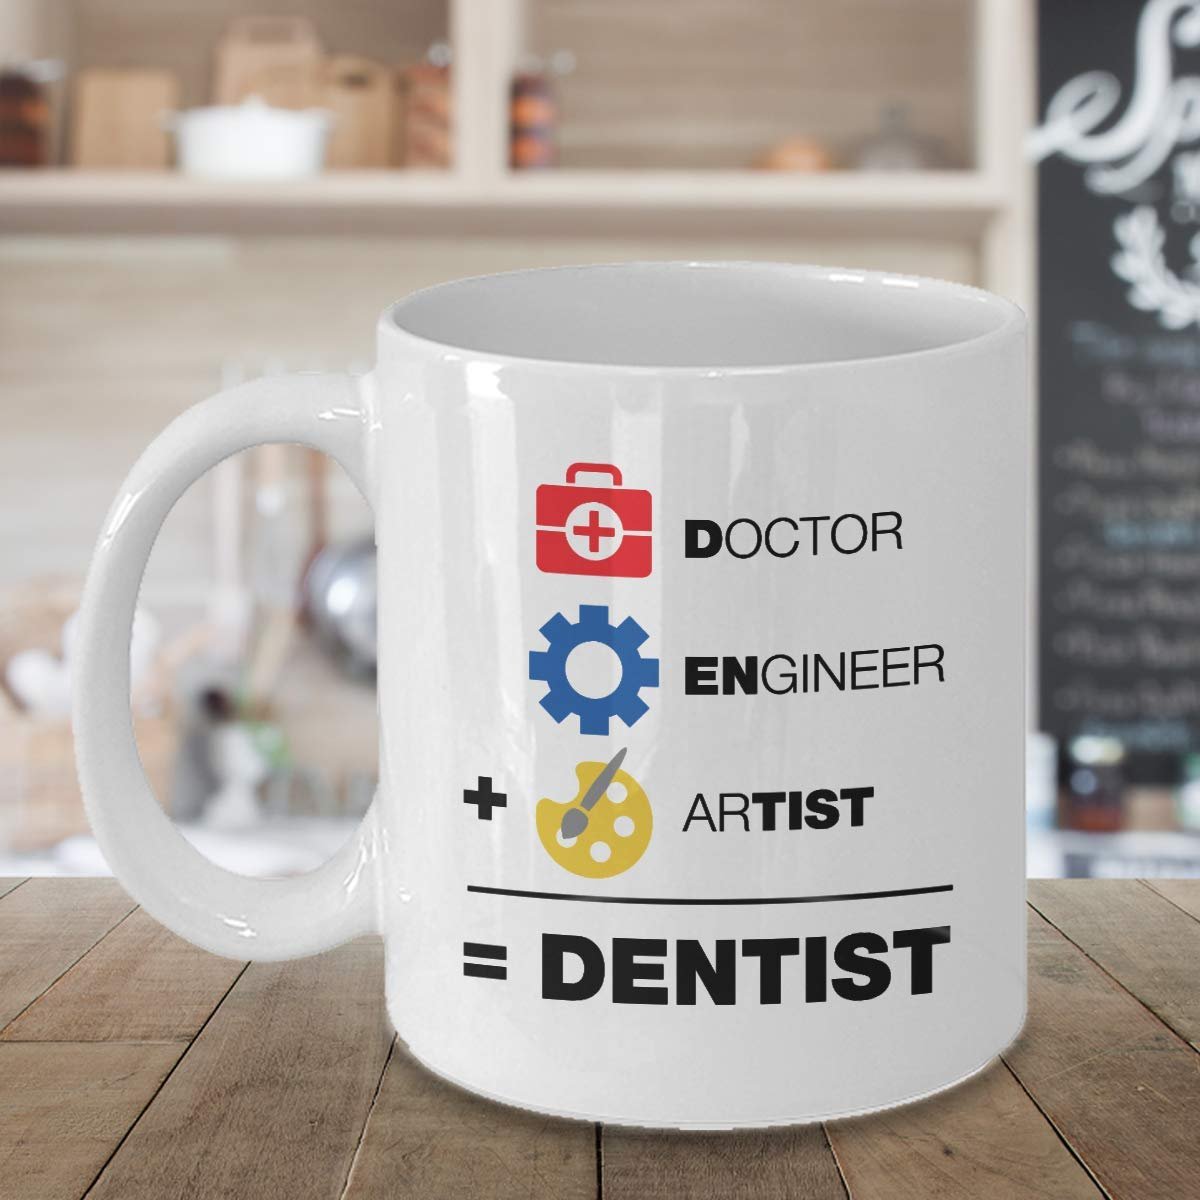 A Doctor, An Engineer & An Artist Is Equal To A Dentist Funny Equation Themed Coffee & Tea Gift Mug Cup, Home Décor, Office Decoration, Stuff & Christmas Or Graduation Gifts For Men & Women Dentists - image 3 of 4